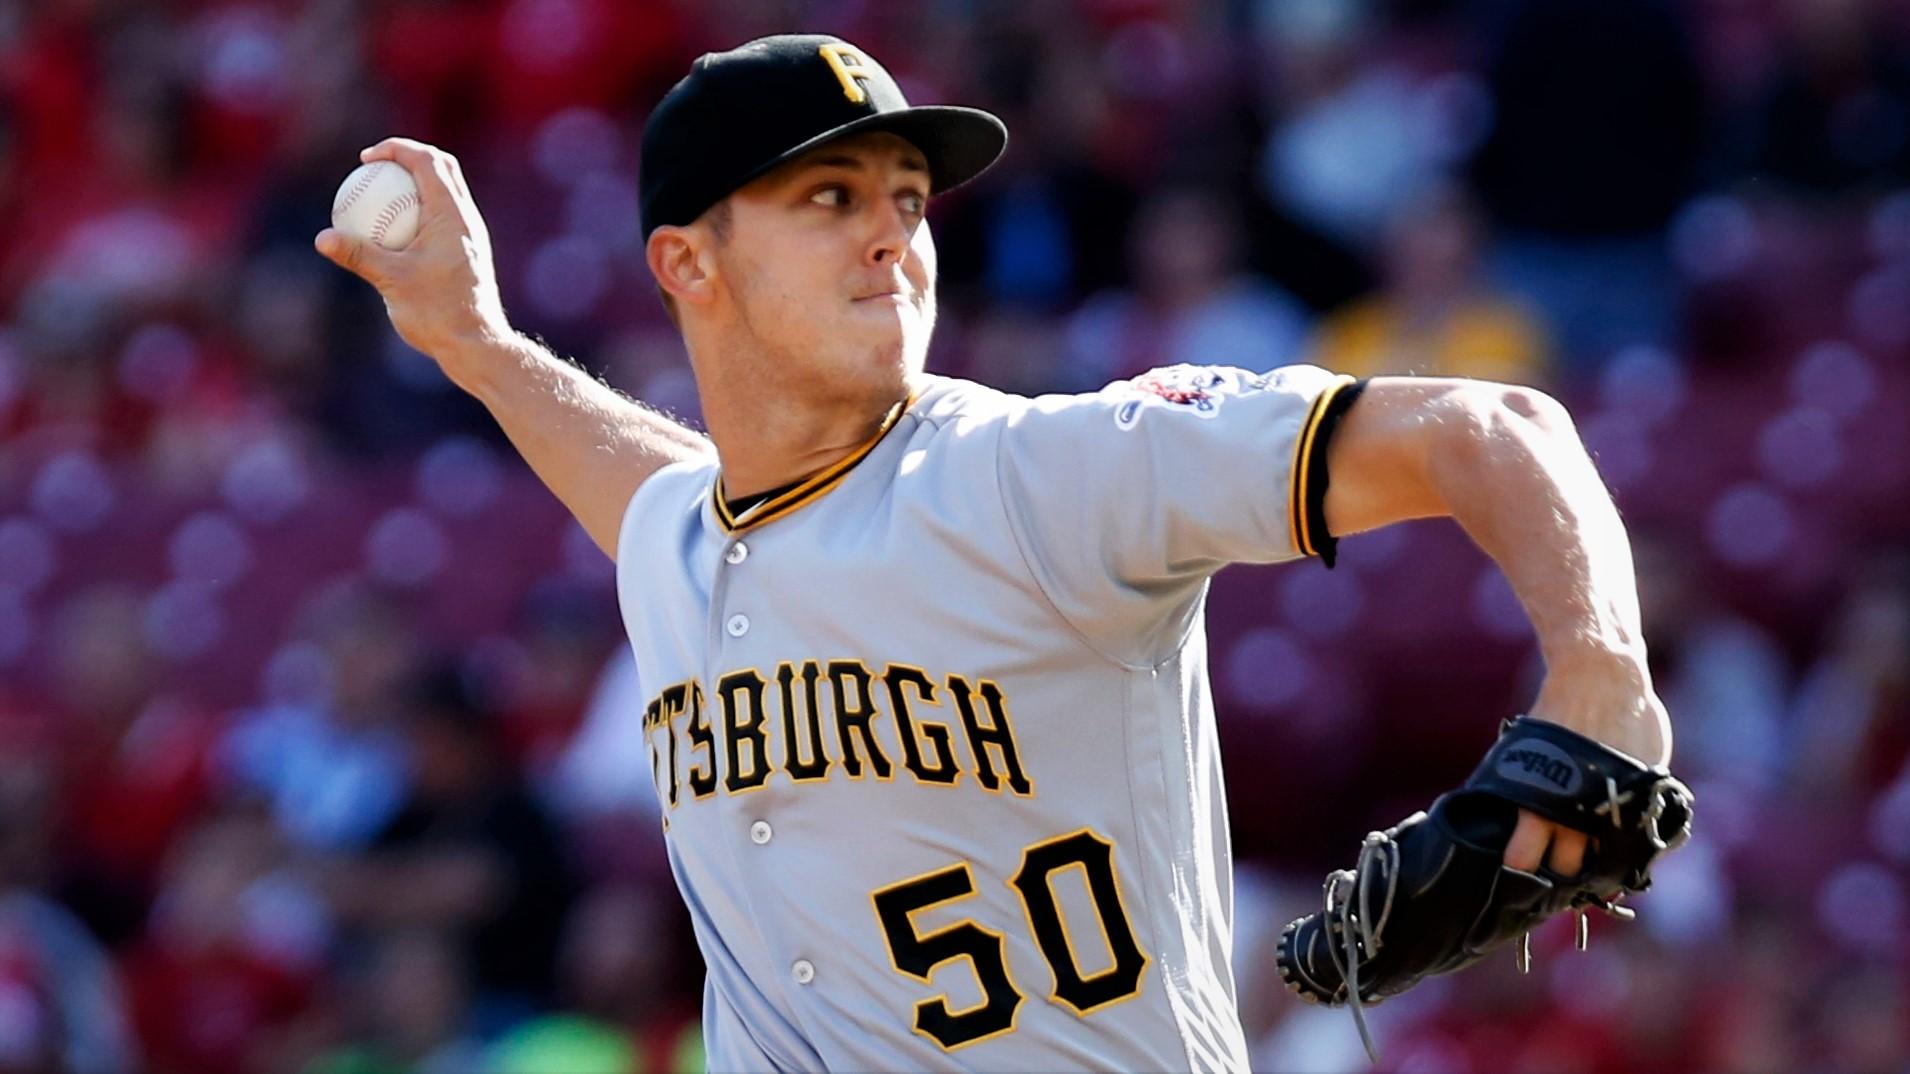 Sep 29, 2018; Cincinnati, OH, USA; Pittsburgh Pirates starting pitcher Jameson Taillon (50) throws against the Cincinnati Reds during the first inning at Great American Ball Park. Mandatory Credit: David Kohl-USA TODAY Sports / David Kohl-USA TODAY Sports